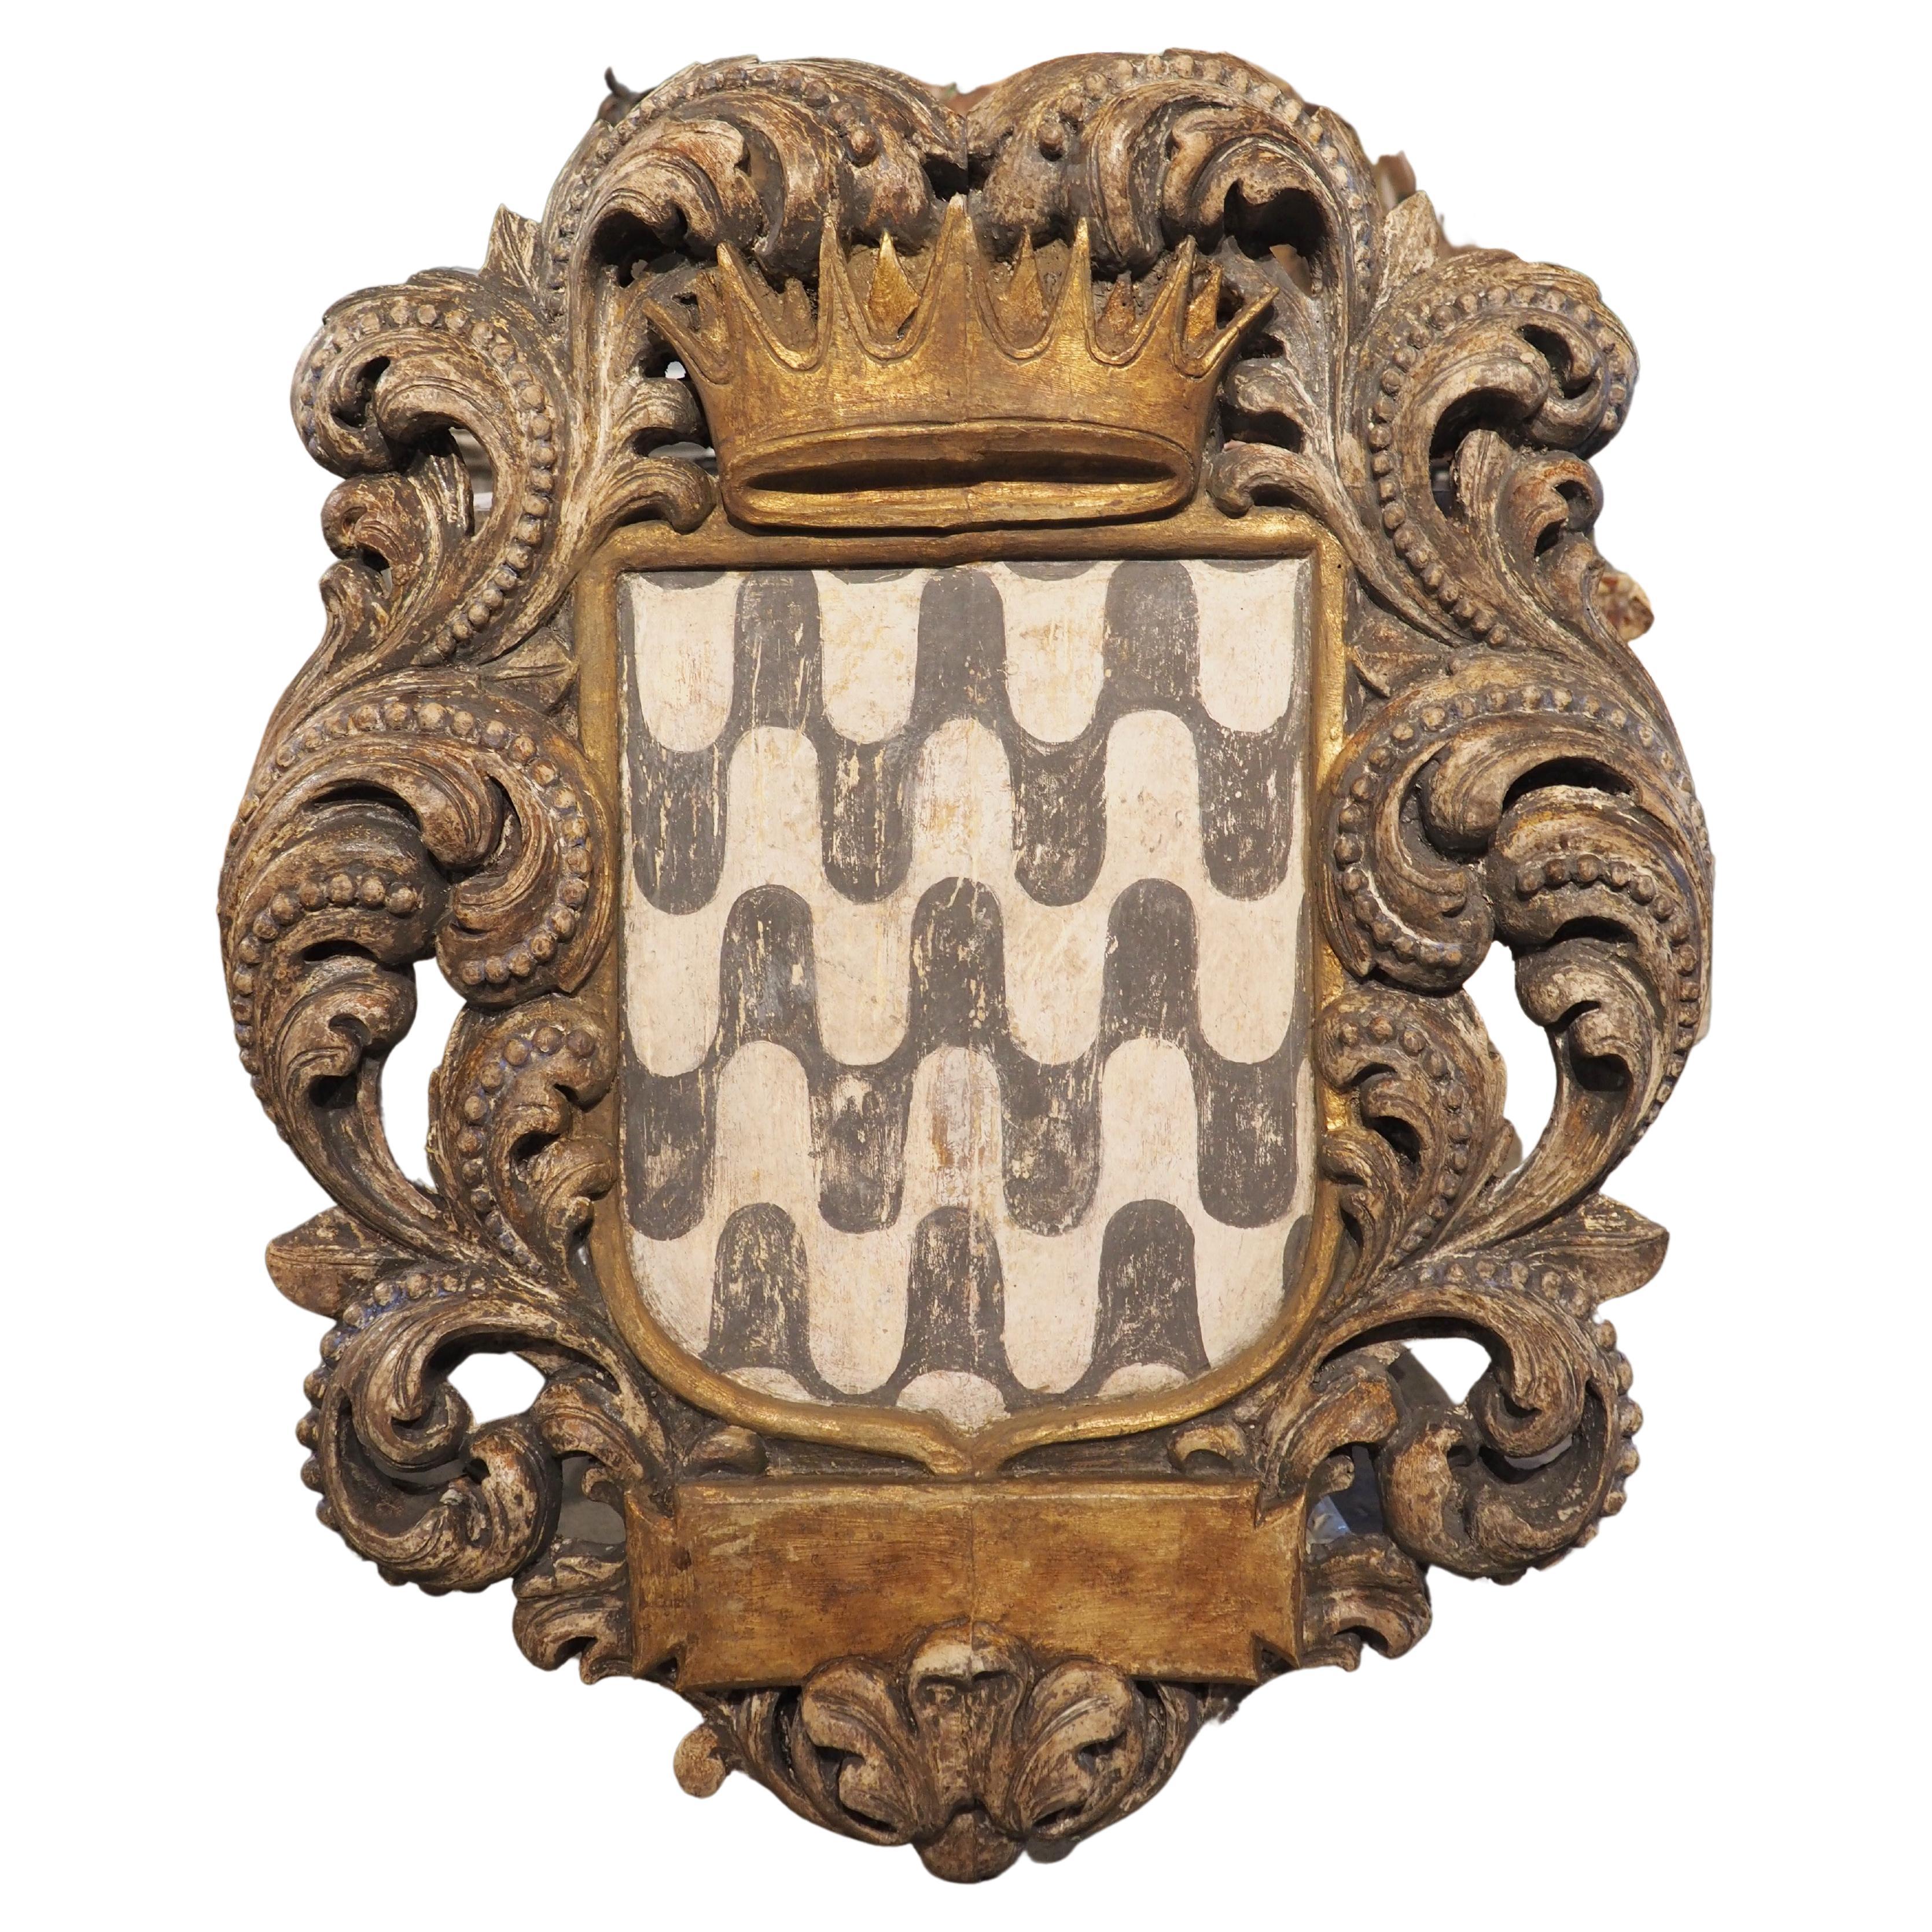 Carved and Painted Wooden Cartouche Plaque from Florence, Italy